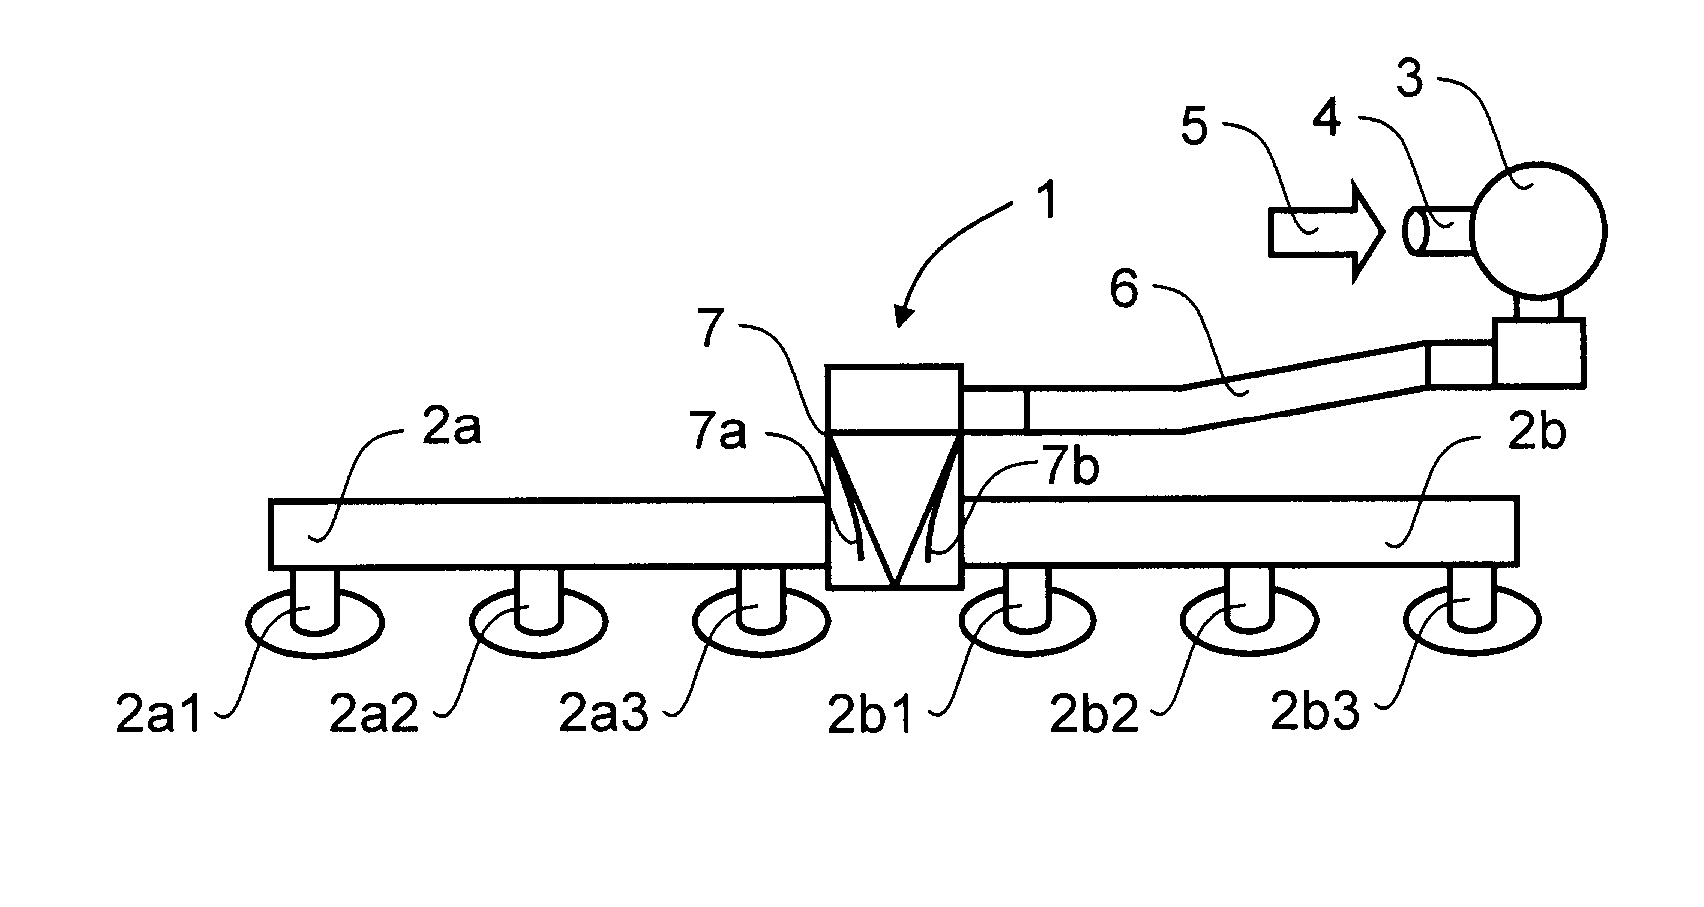 Secondary air injection system for an internal combustion engine